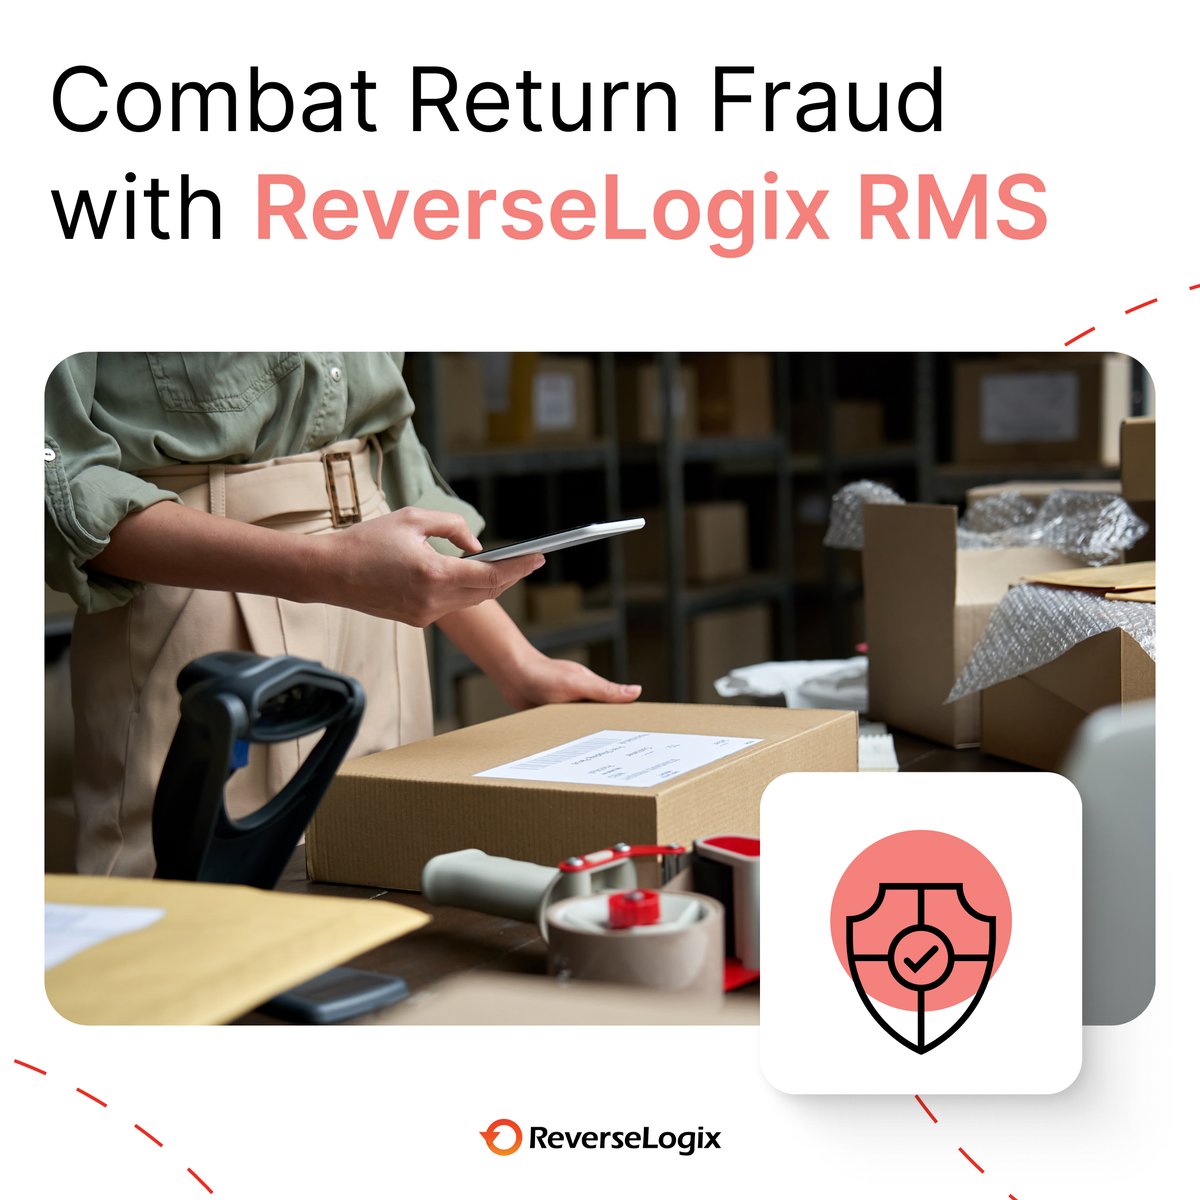 Don't let return fraud undermine your business. Partner with ReverseLogix and turn your returns process into a strategic advantage: hubs.li/Q02w9MxC0

#ReverseLogix #ReturnFraudSolution #SupplyChainSecurity #CustomerTrust #RetailInnovation